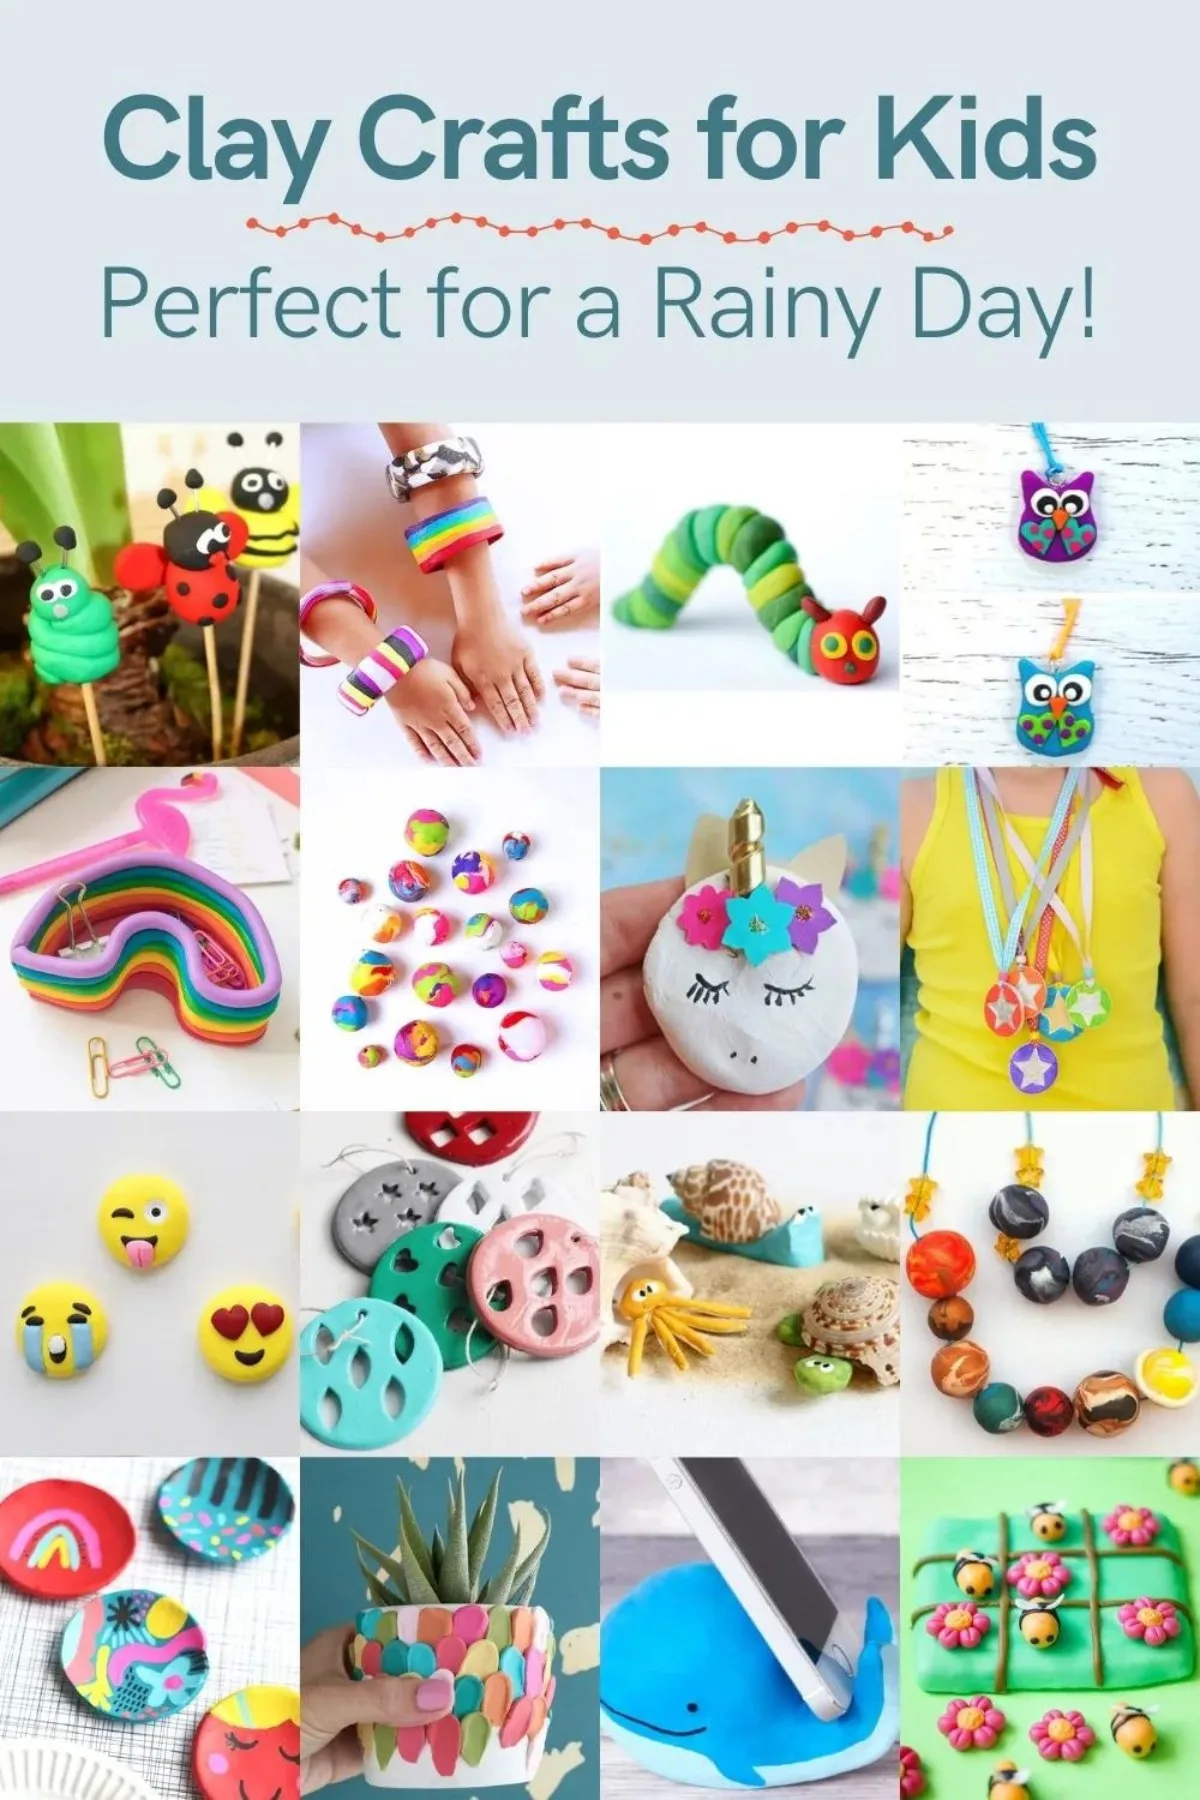 Absolutely Beautiful Spring Art Projects for Kids - Fun-A-Day!